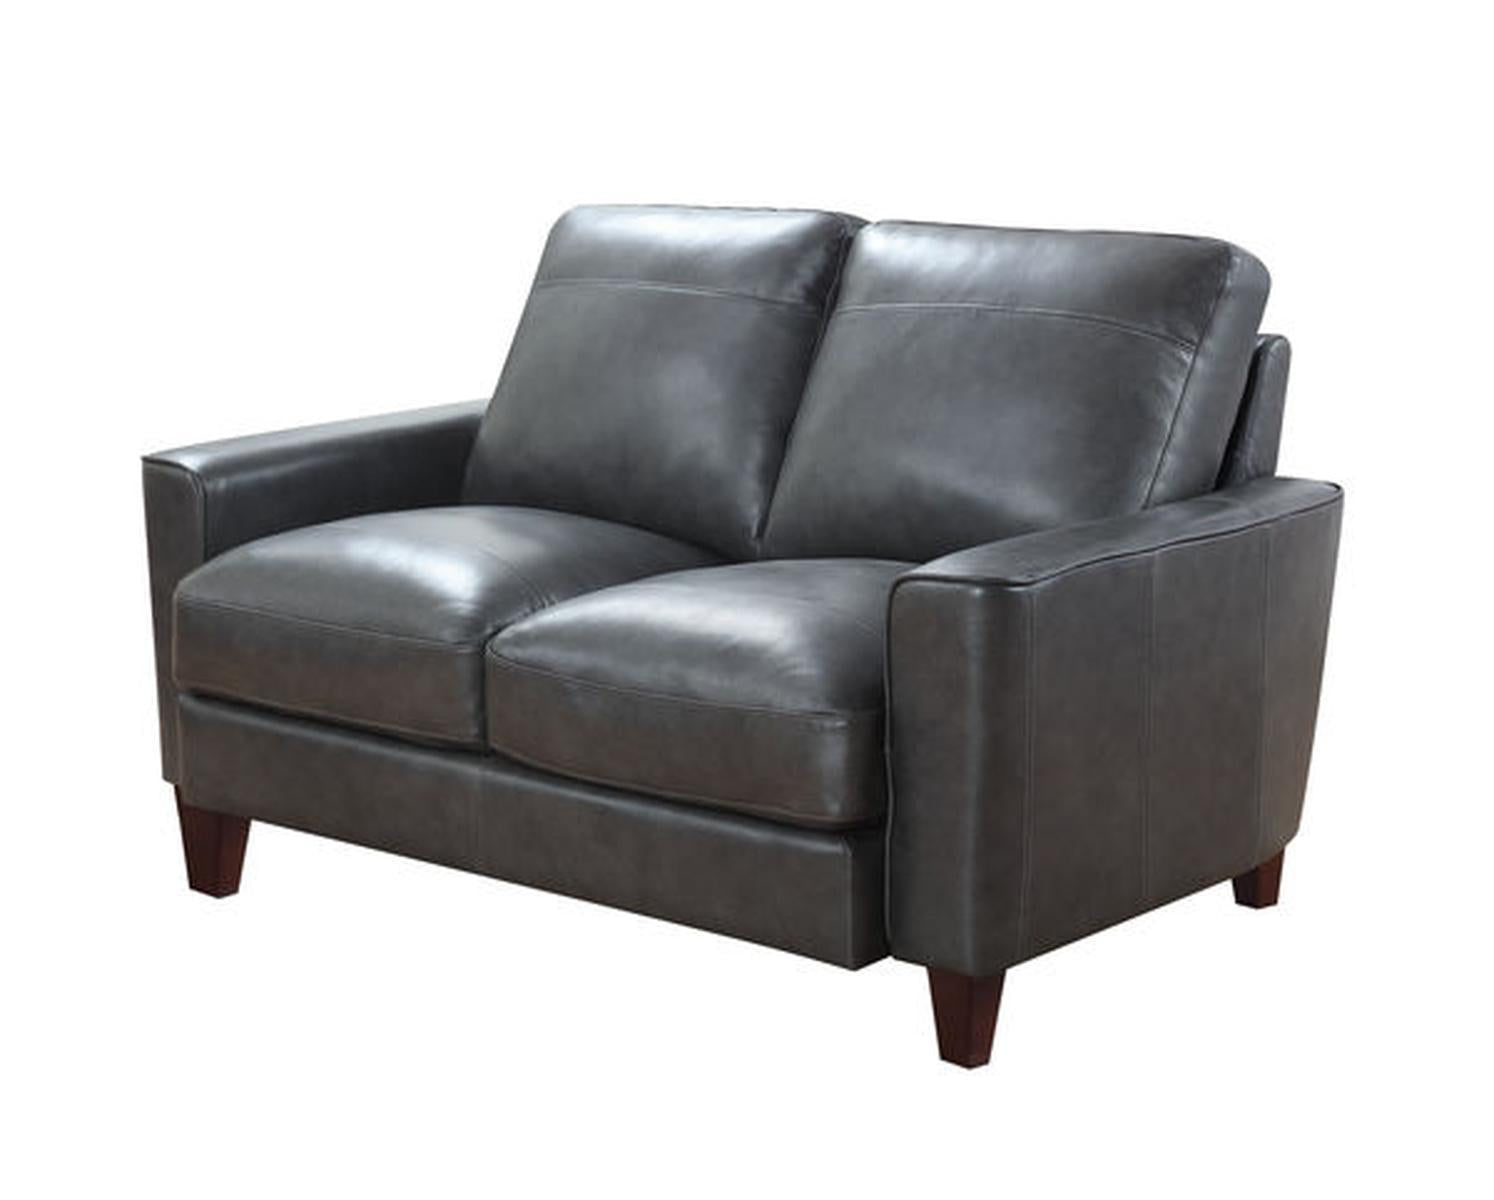 Leather Italia Georgetown-Chino Loveseat in Grey